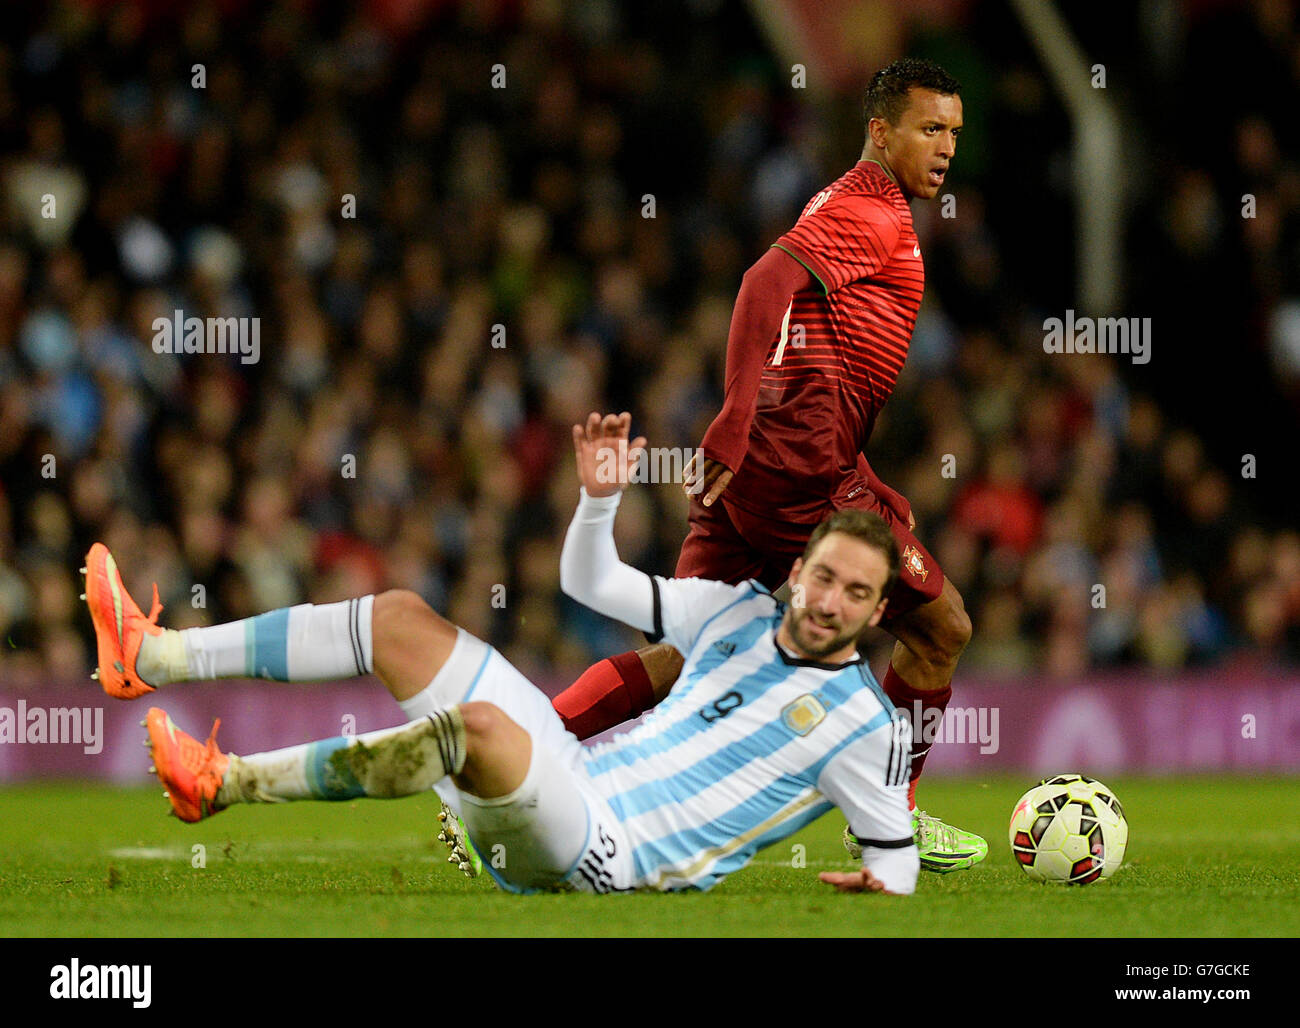 Portugal's Luis Nani skips past Argentina's Gonzalo Higuain during the International Friendly match at Old Trafford, Manchester. PRESS ASSOCIATION Photo. Picture date: Tuesday November 18, 2014. See PA Story SOCCER Argentina. Photo credit should read: Martin Rickett/PA Wire. Stock Photo